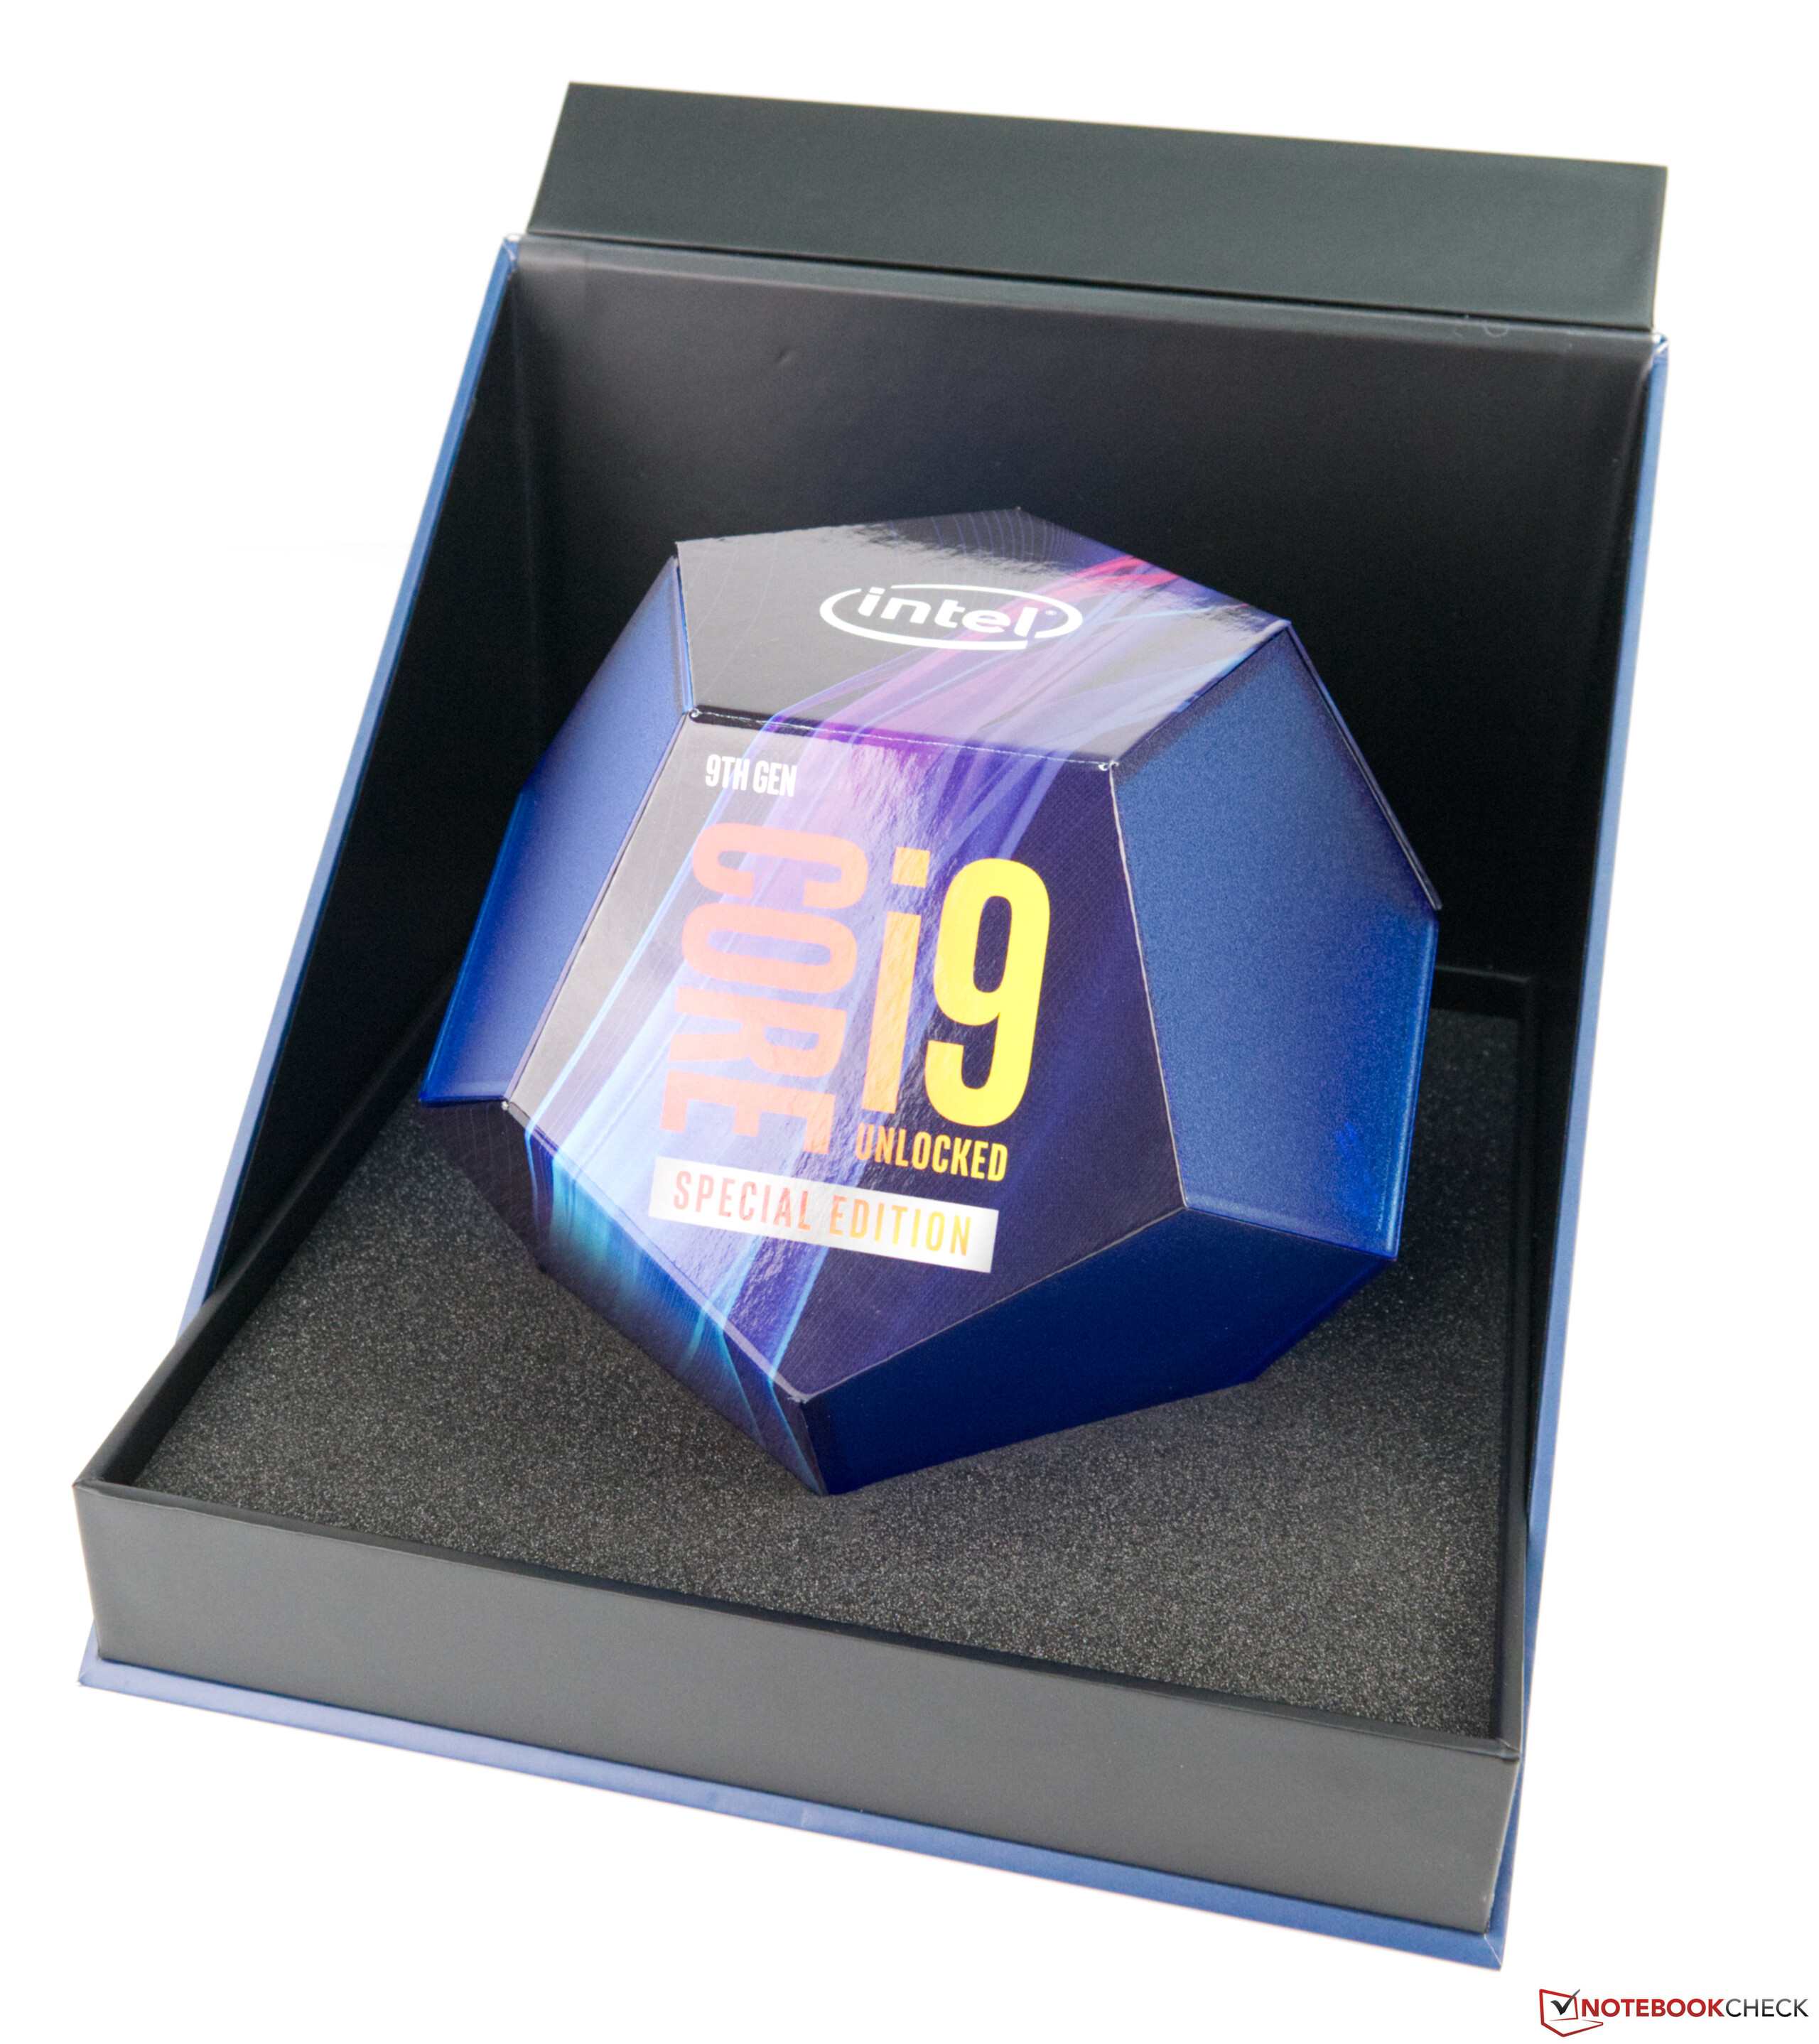 Intel Core i9-9900KS Special Edition Review: More power, less